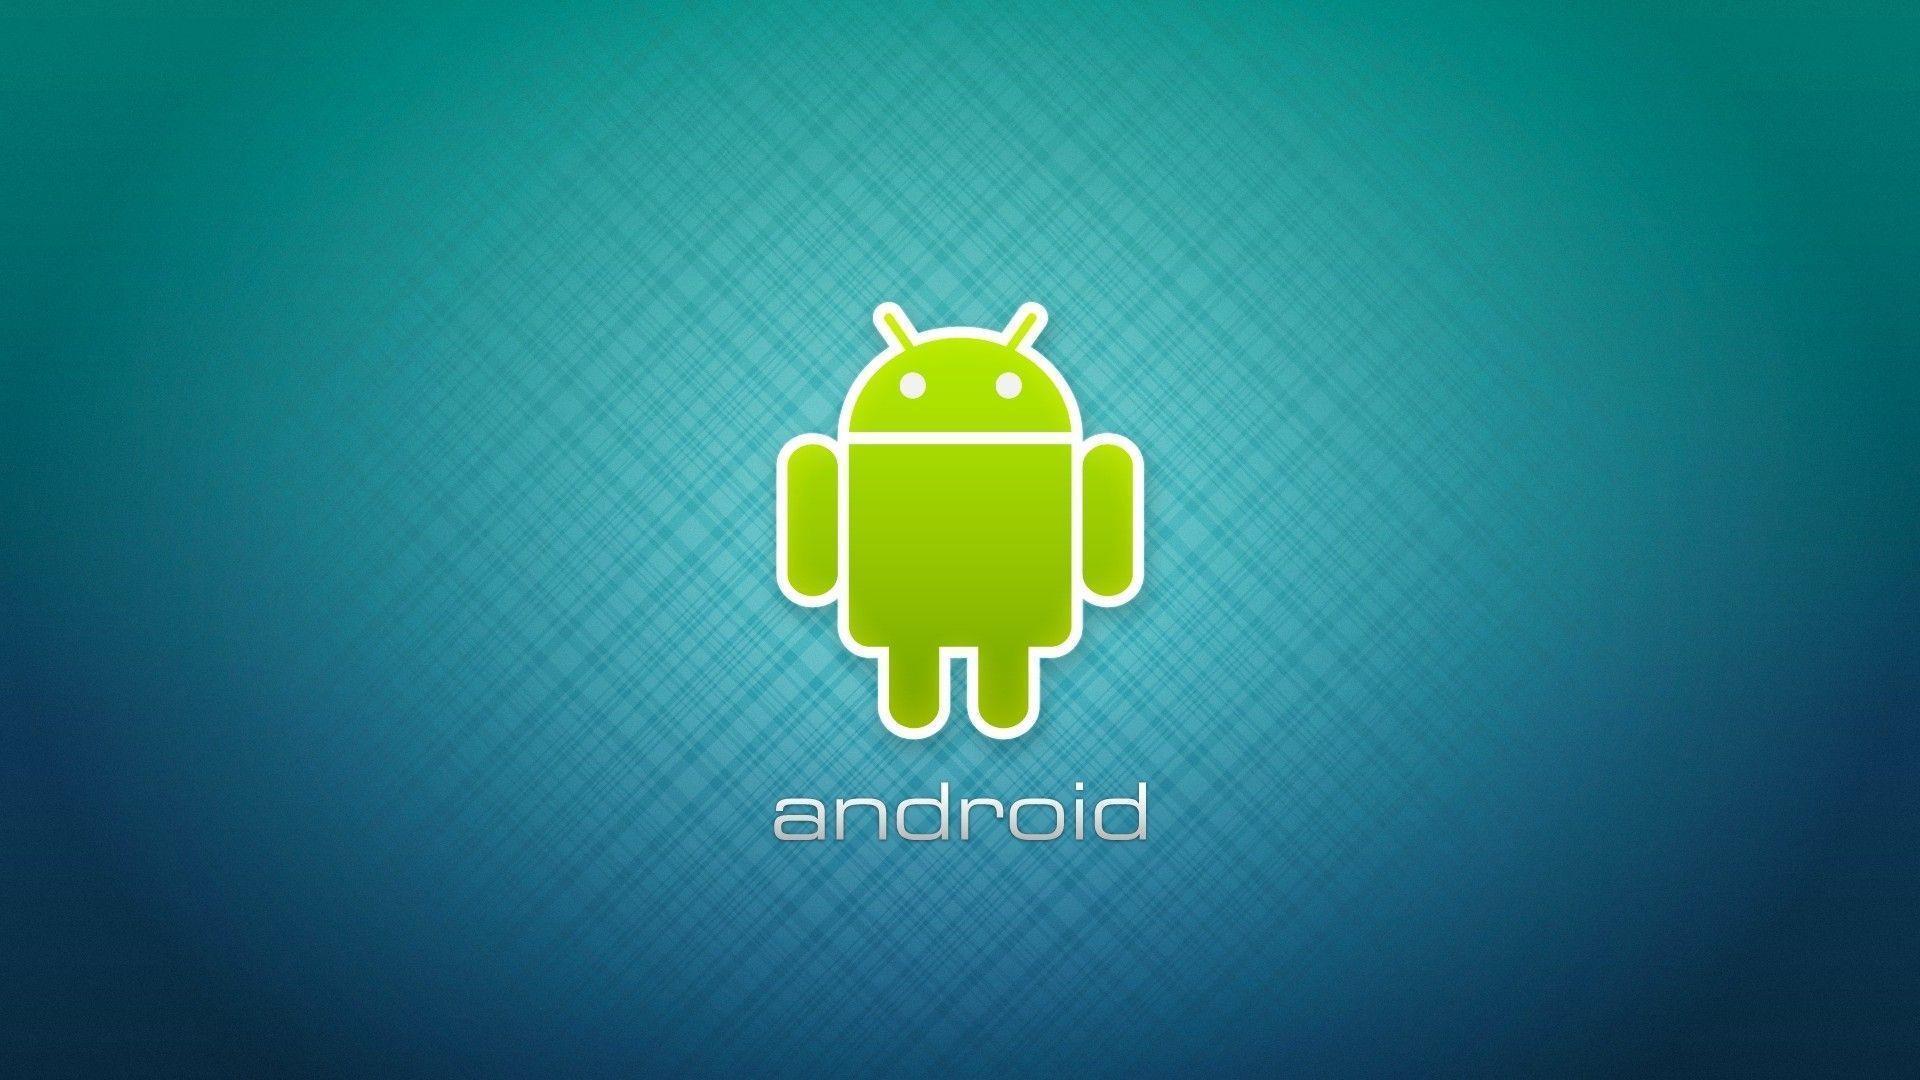 Android Logo Wallpapers - Wallpaper Cave